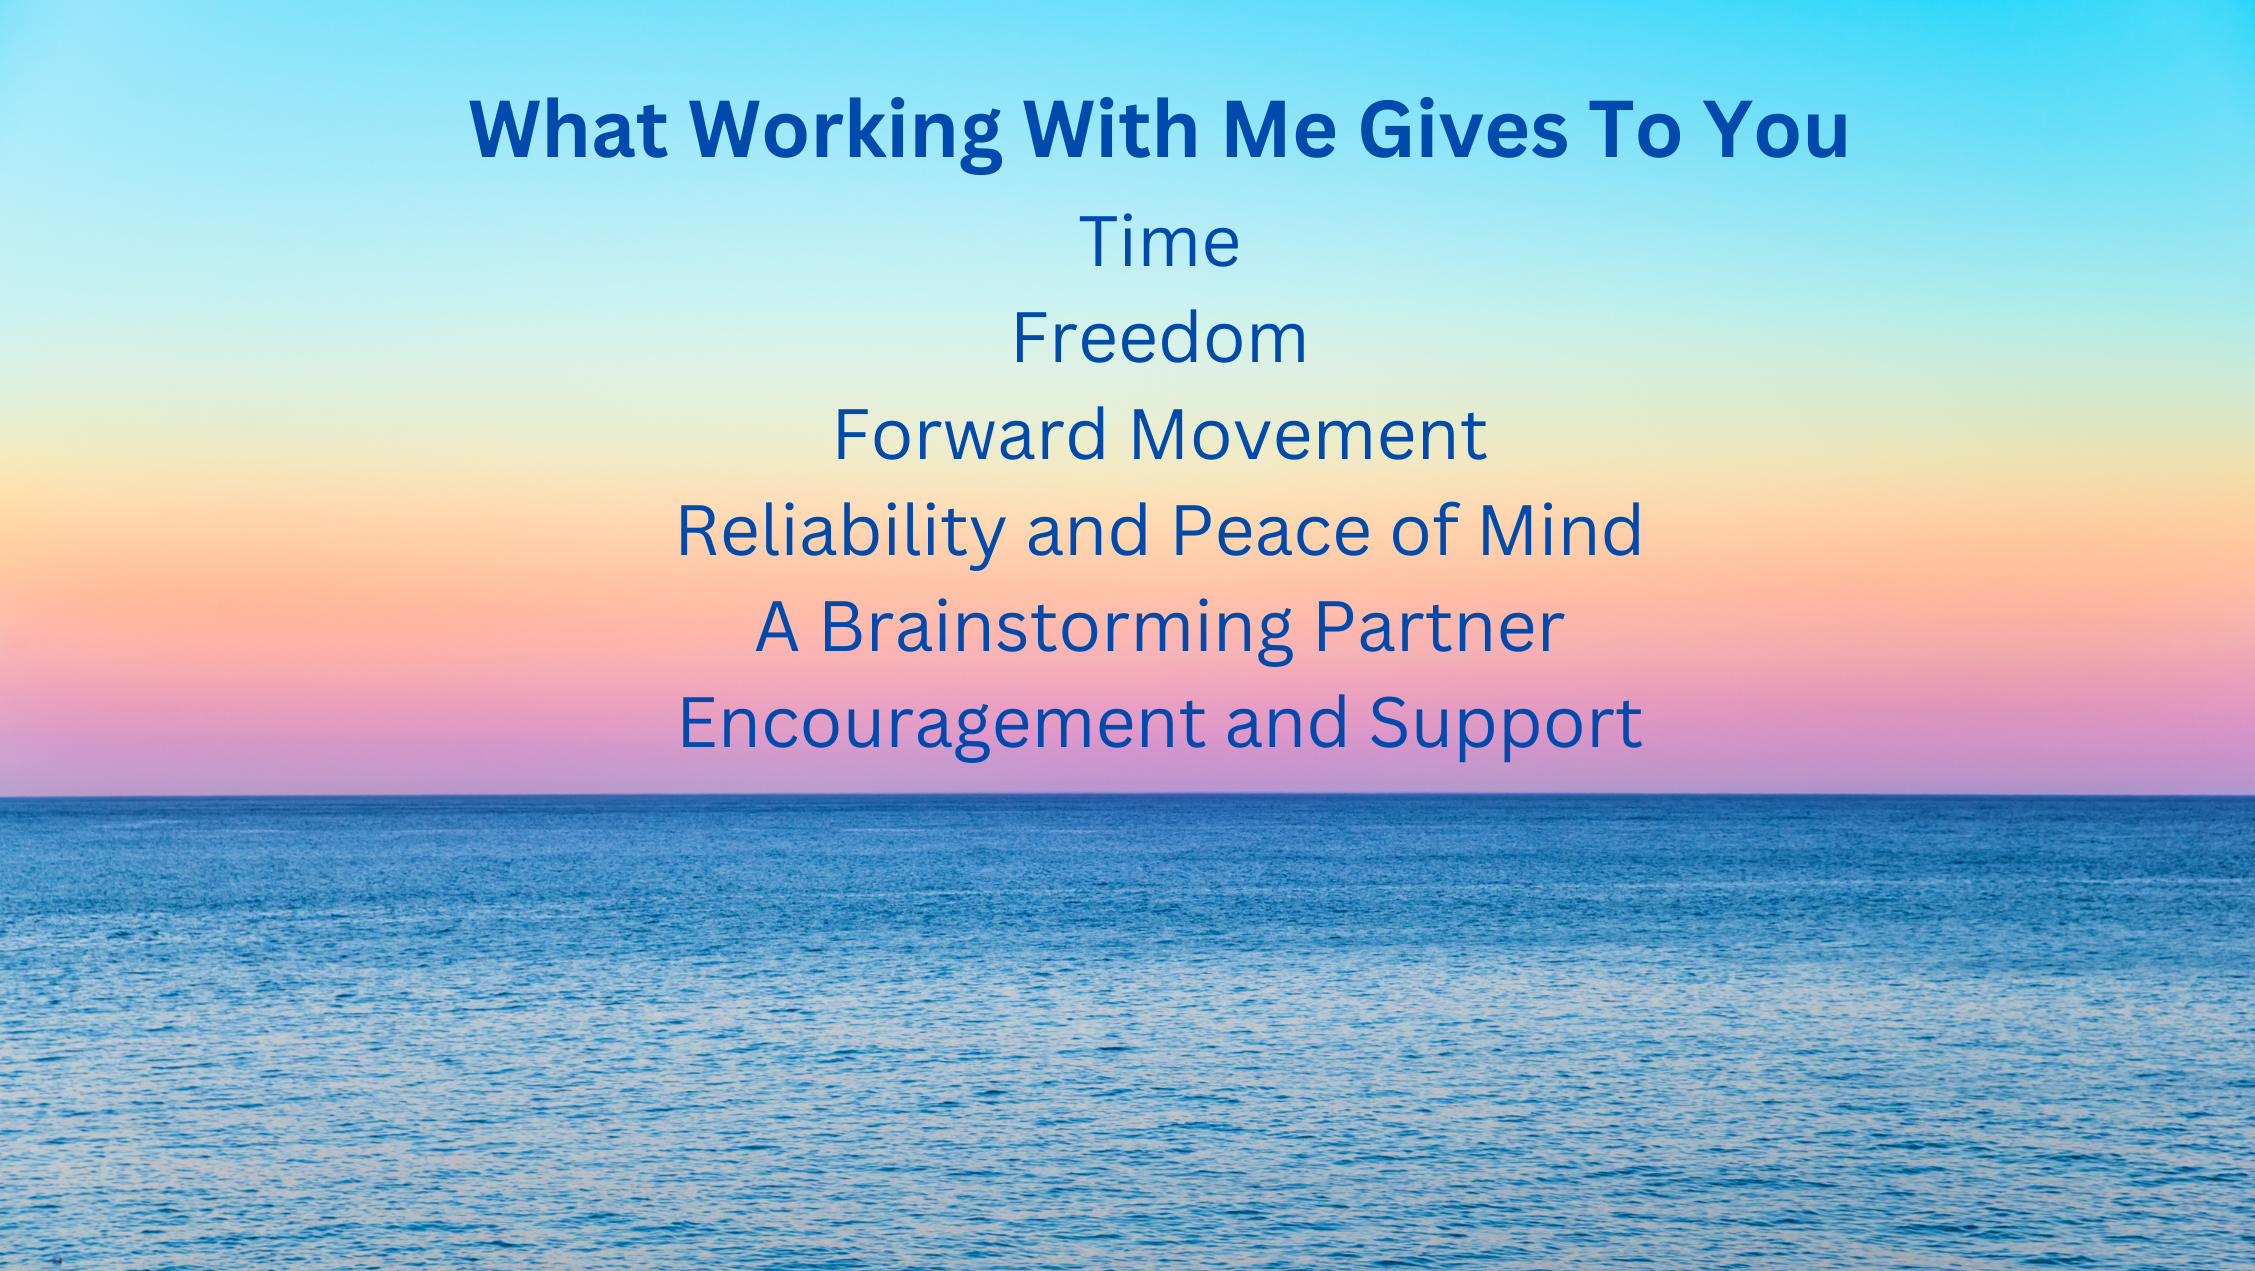 What working with me gives to you (2)